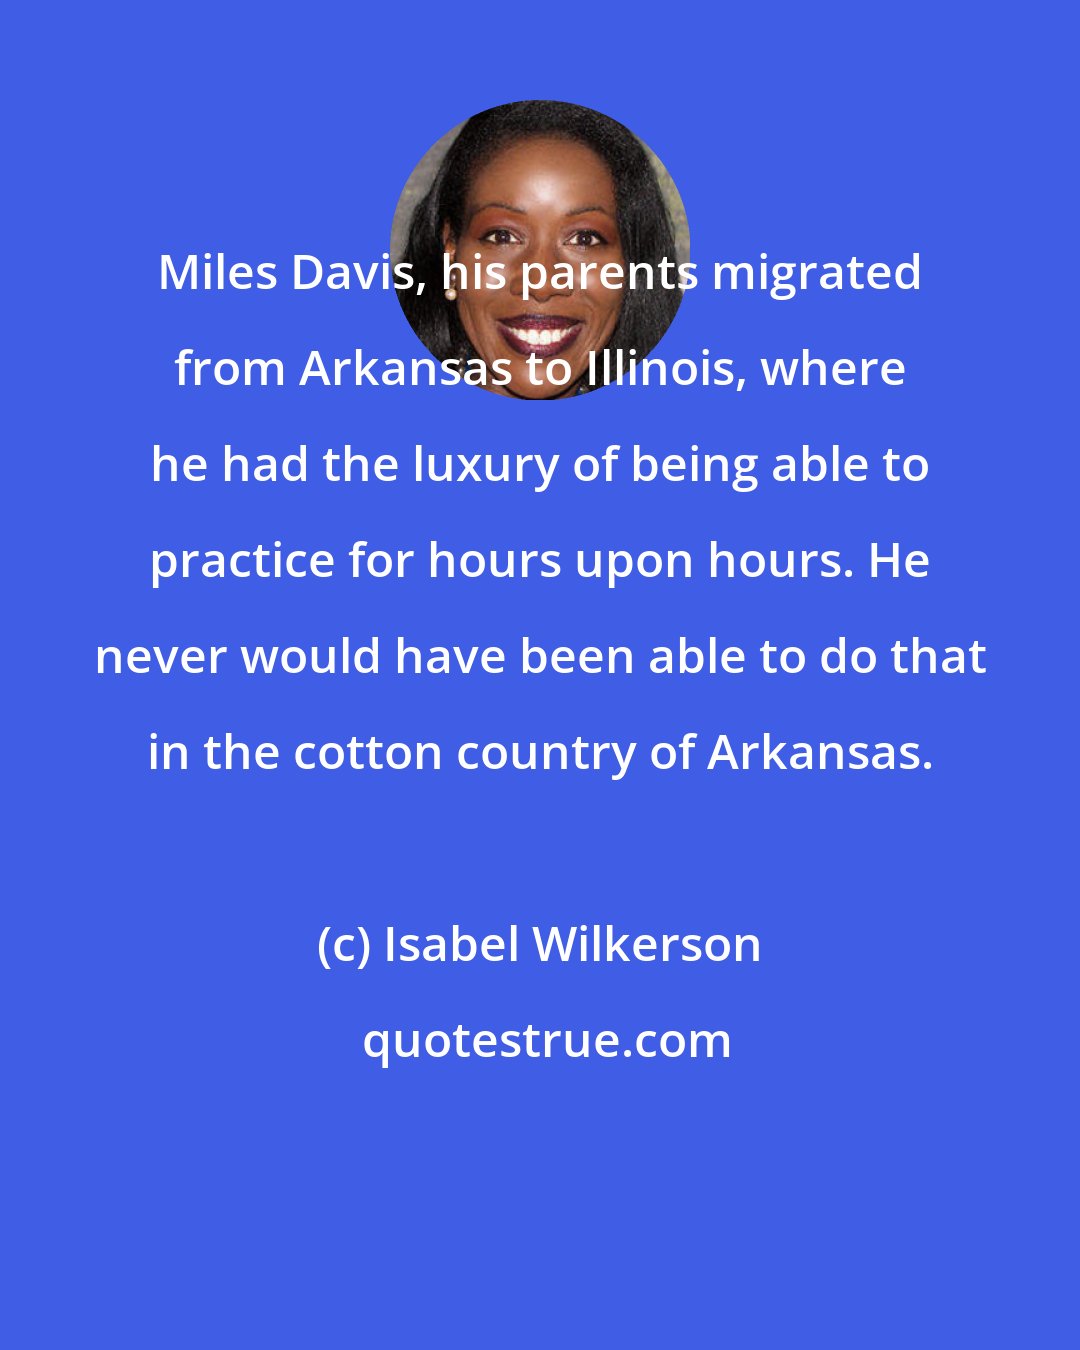 Isabel Wilkerson: Miles Davis, his parents migrated from Arkansas to Illinois, where he had the luxury of being able to practice for hours upon hours. He never would have been able to do that in the cotton country of Arkansas.